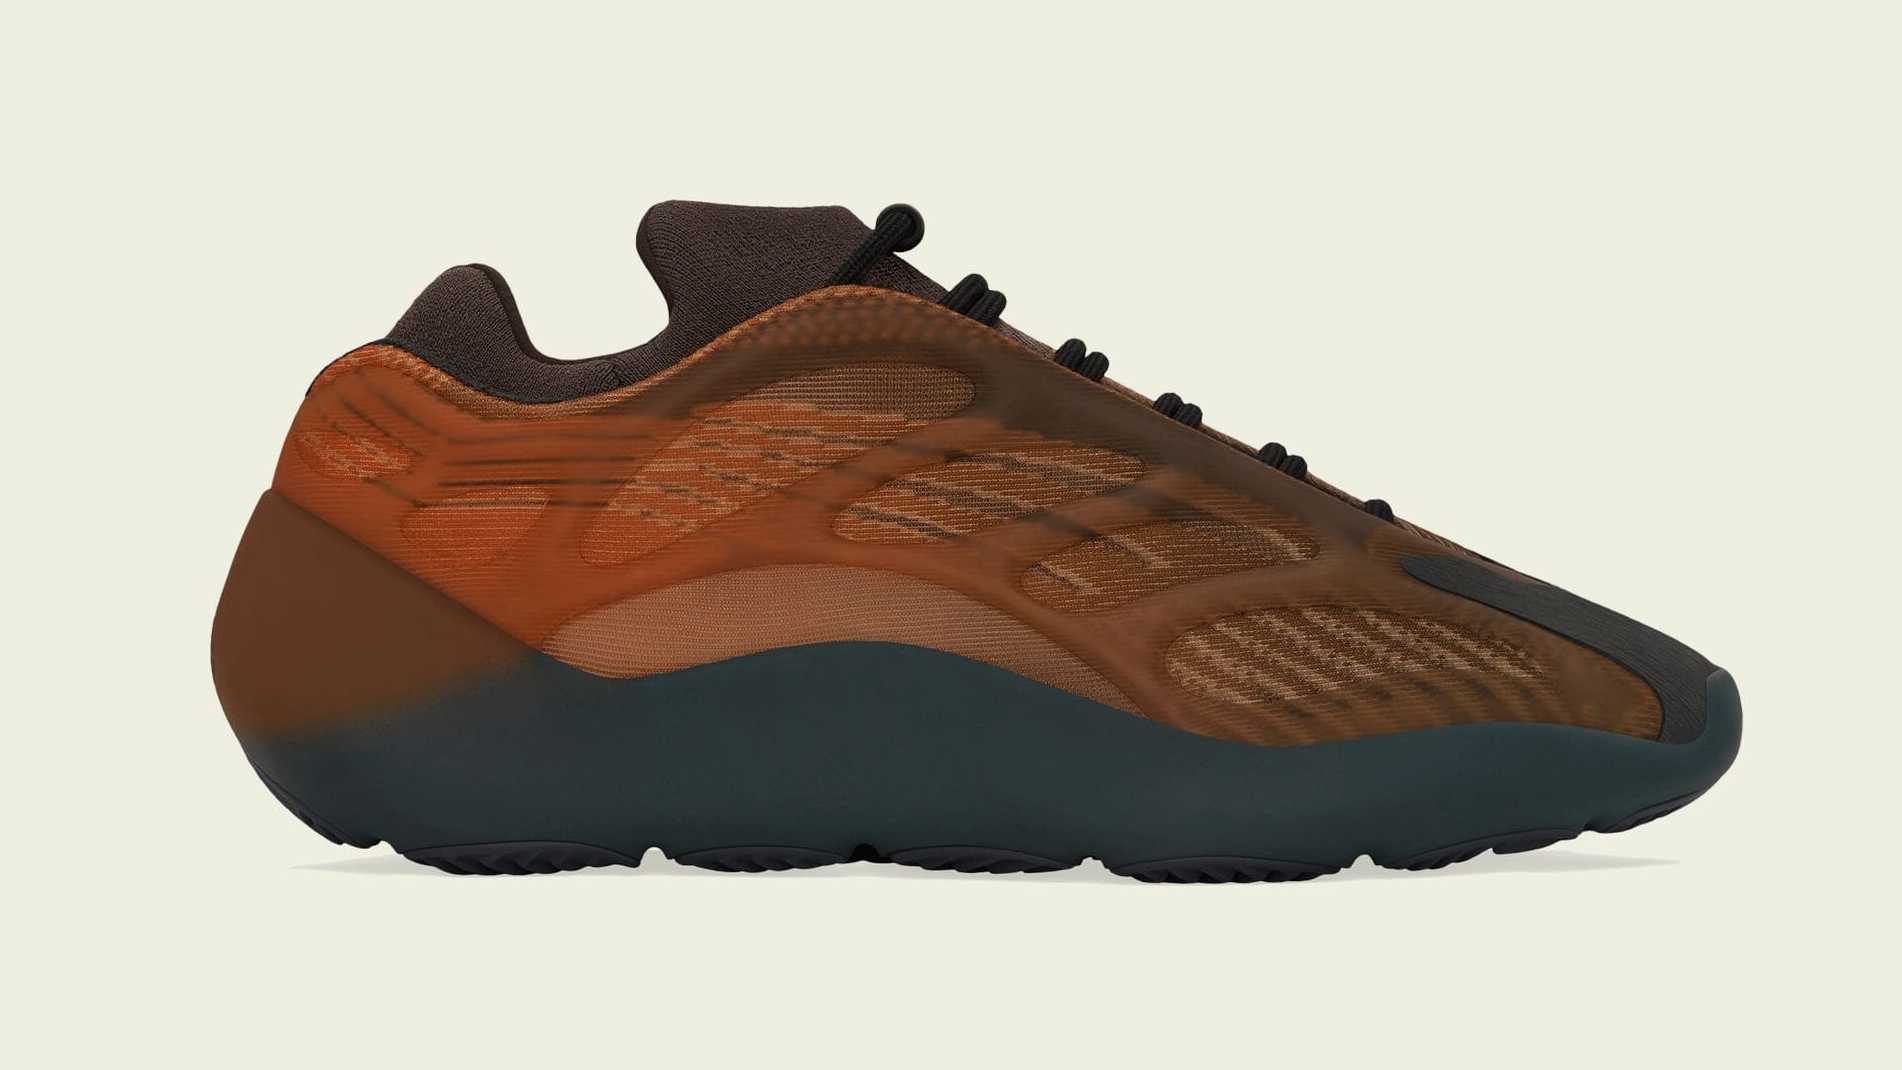 Adidas Yeezy 700 V3 'Copper Fade' GY4109 Lateral